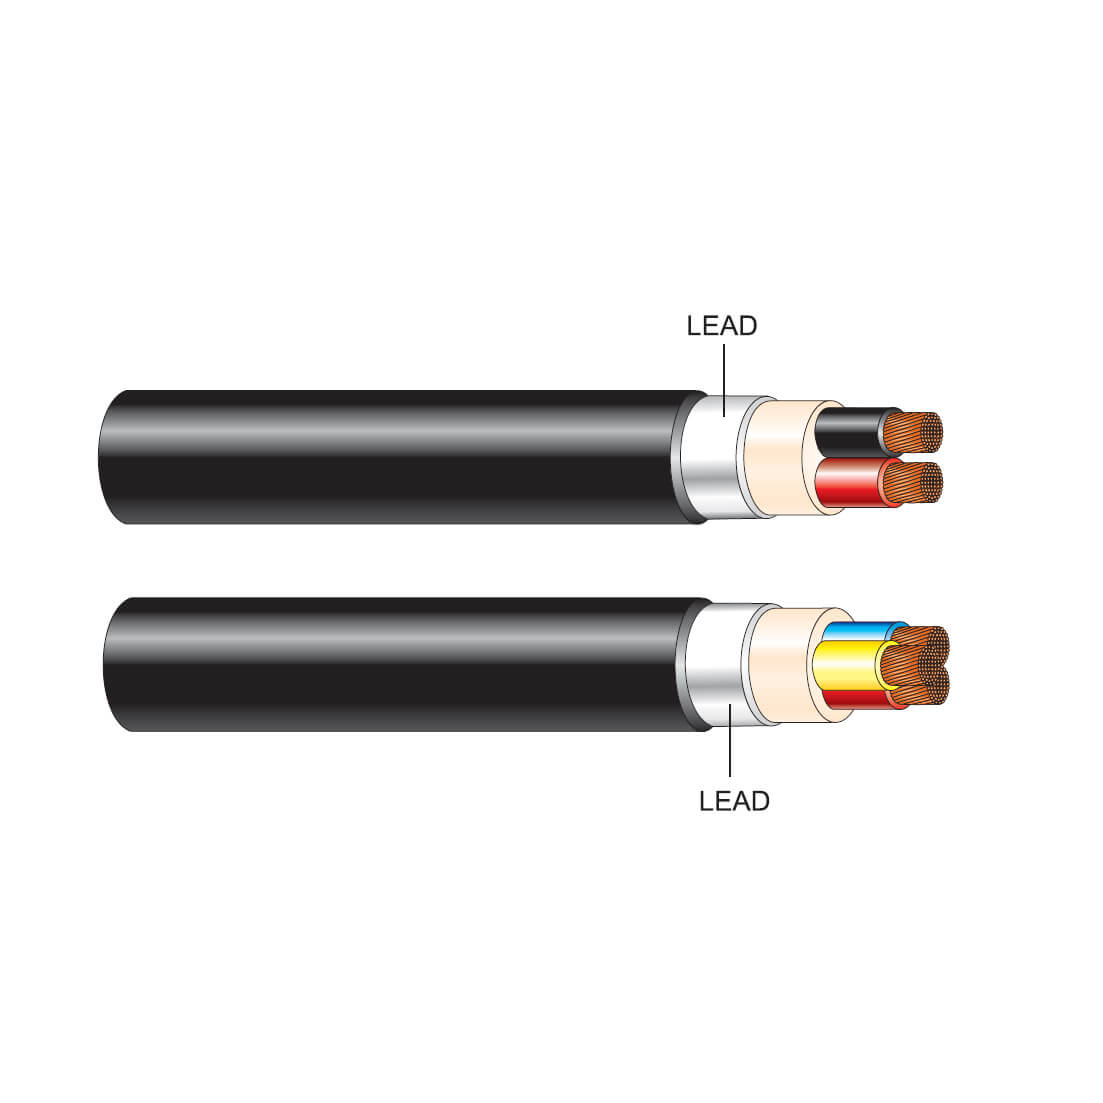 Low Voltage Lead Sheathed Cables Un-Armoured 2 & 3 Core Lead Sheathed Cable Copper Conductors 600/1000 volts LV Leads sheathed